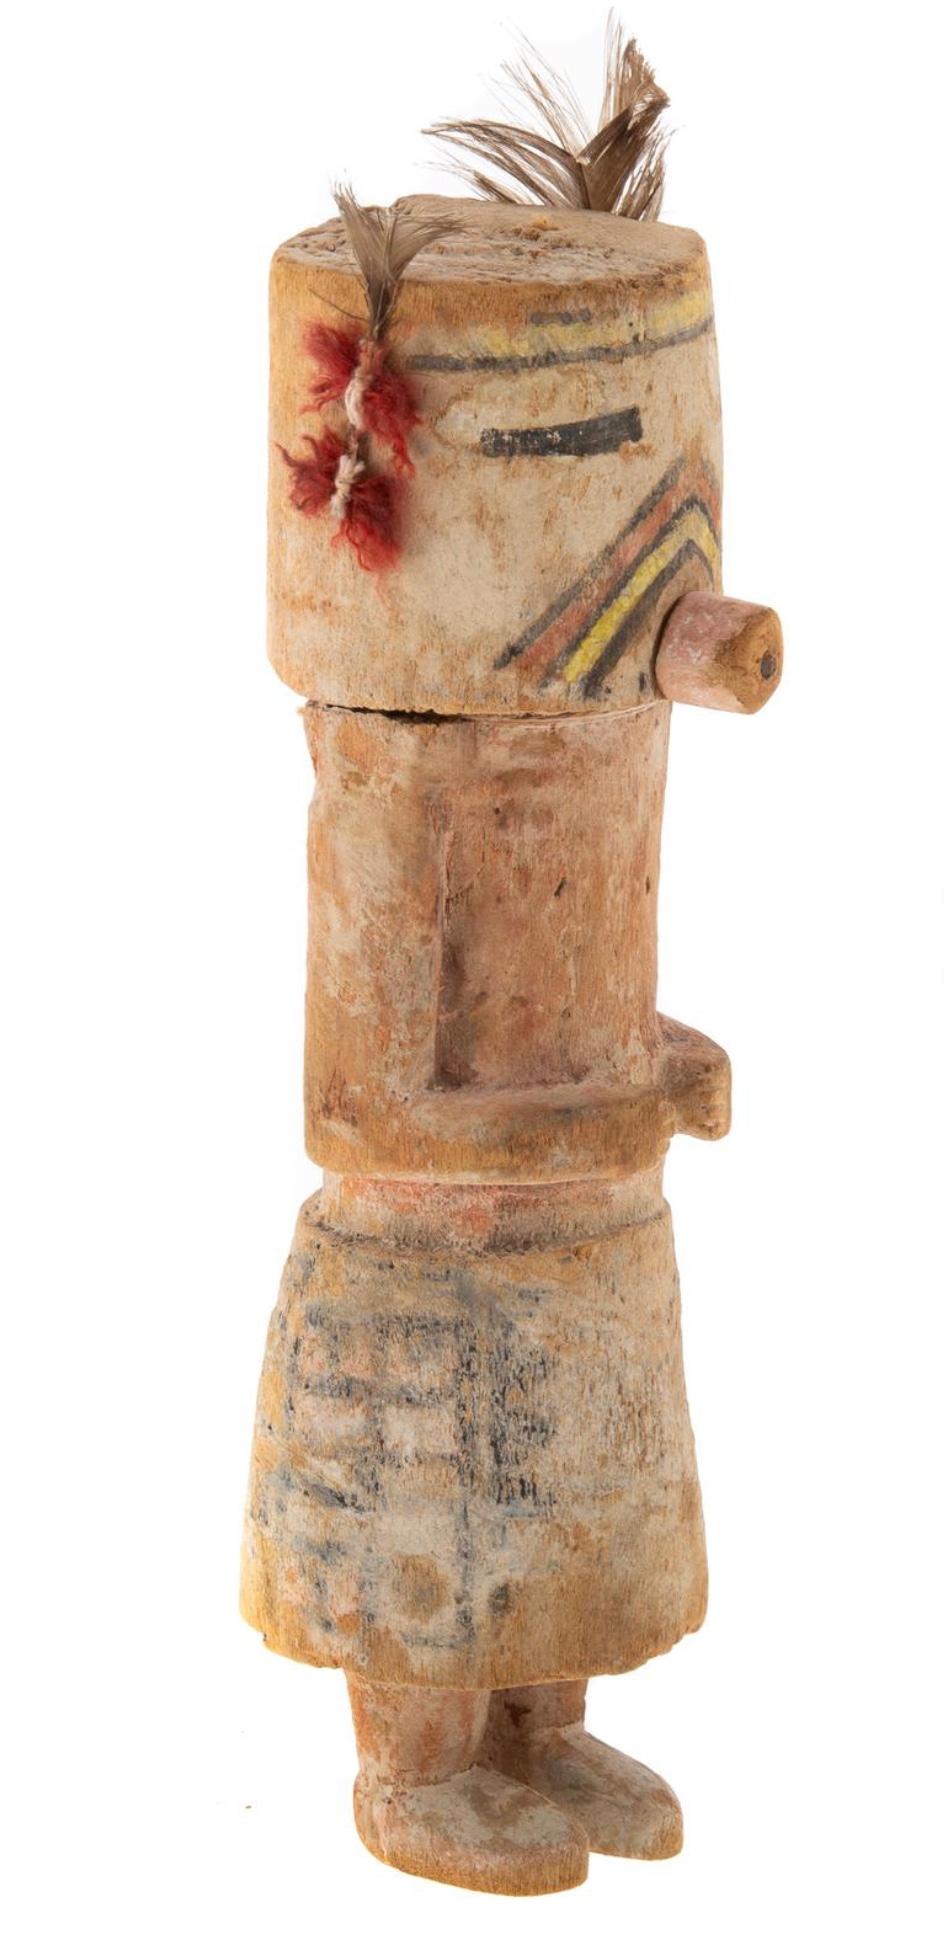 A Hopi carver and painted wood Kachina Doll. Late 19th century: cottonwood with earthen pigments, enhanced with a few feathers and dyed wool tufts. A rare early Hopi Kachina Doll. Kasina.